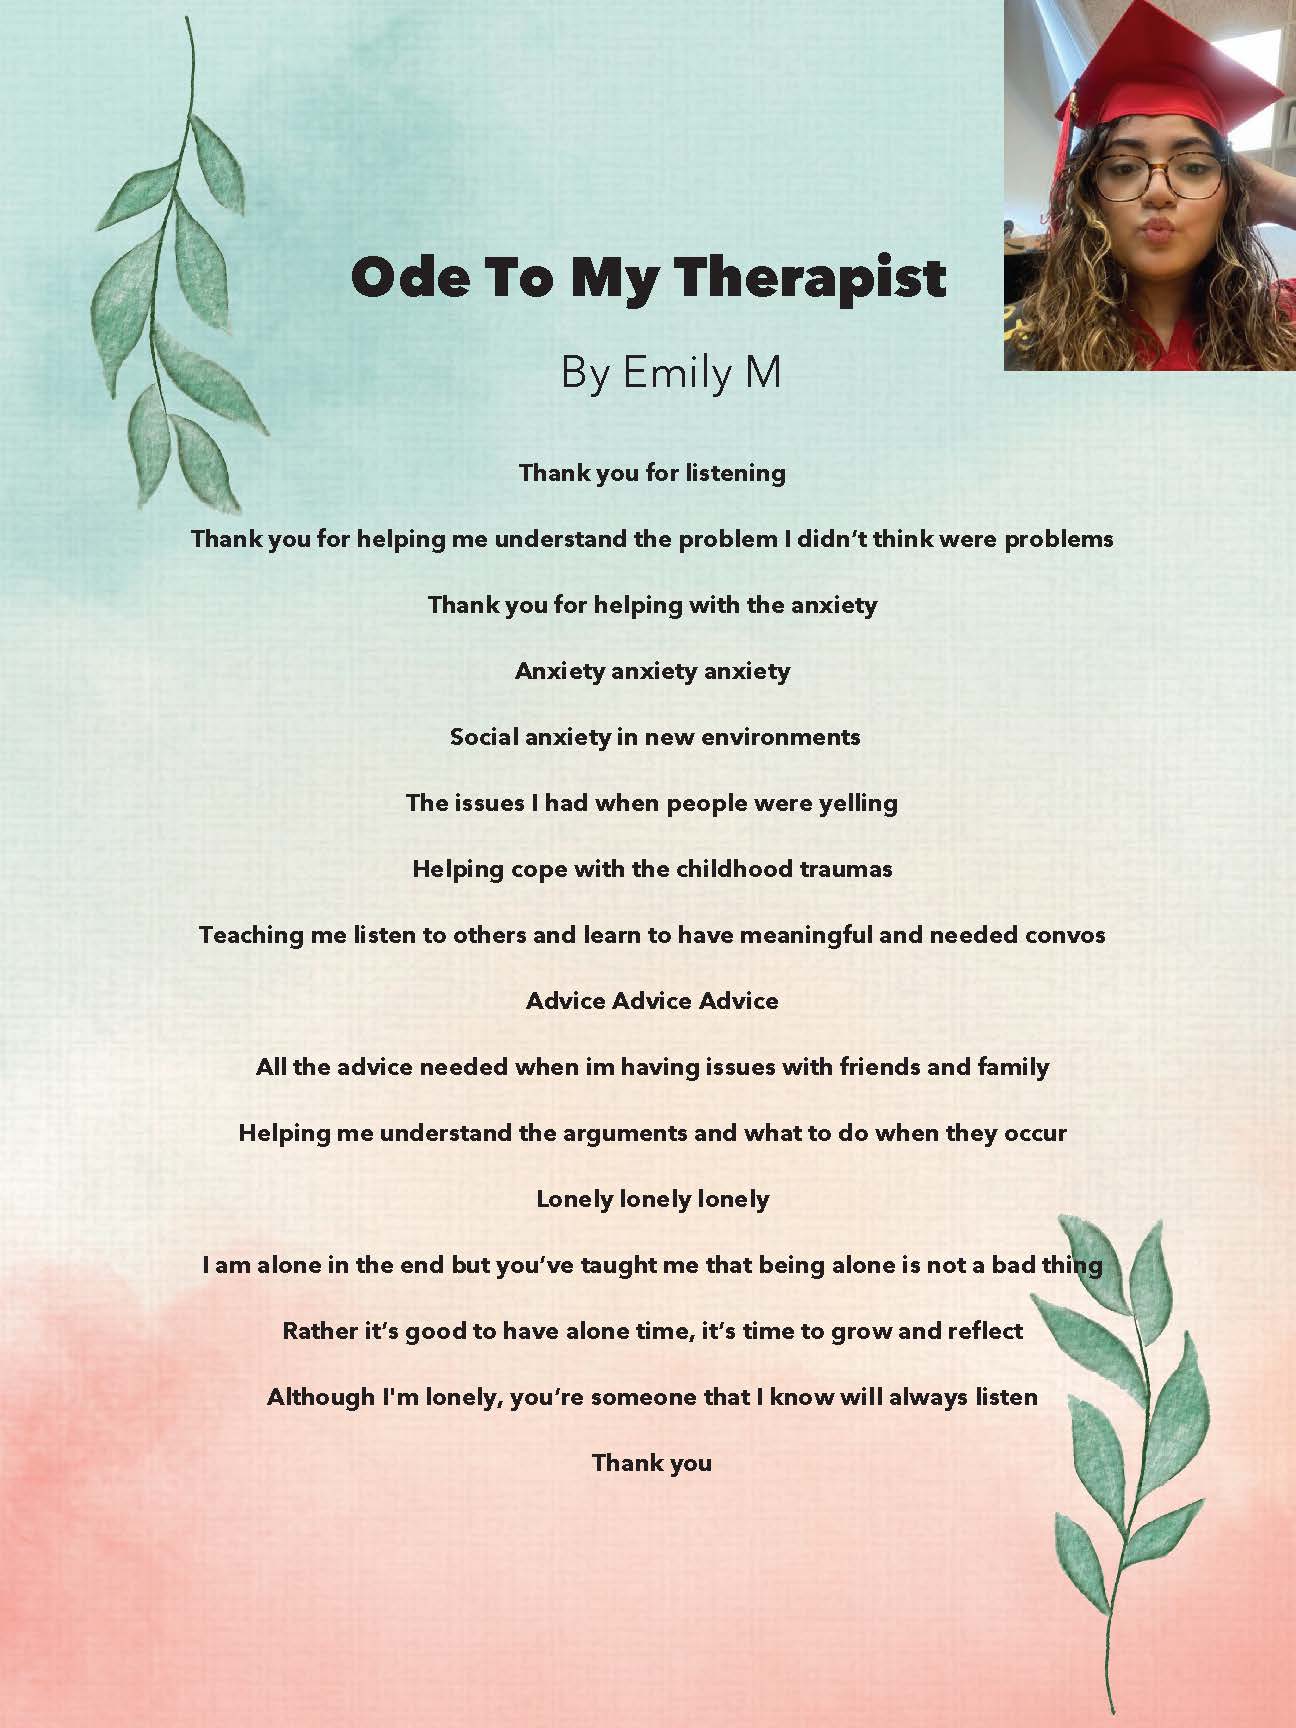 Ode to my Therapist